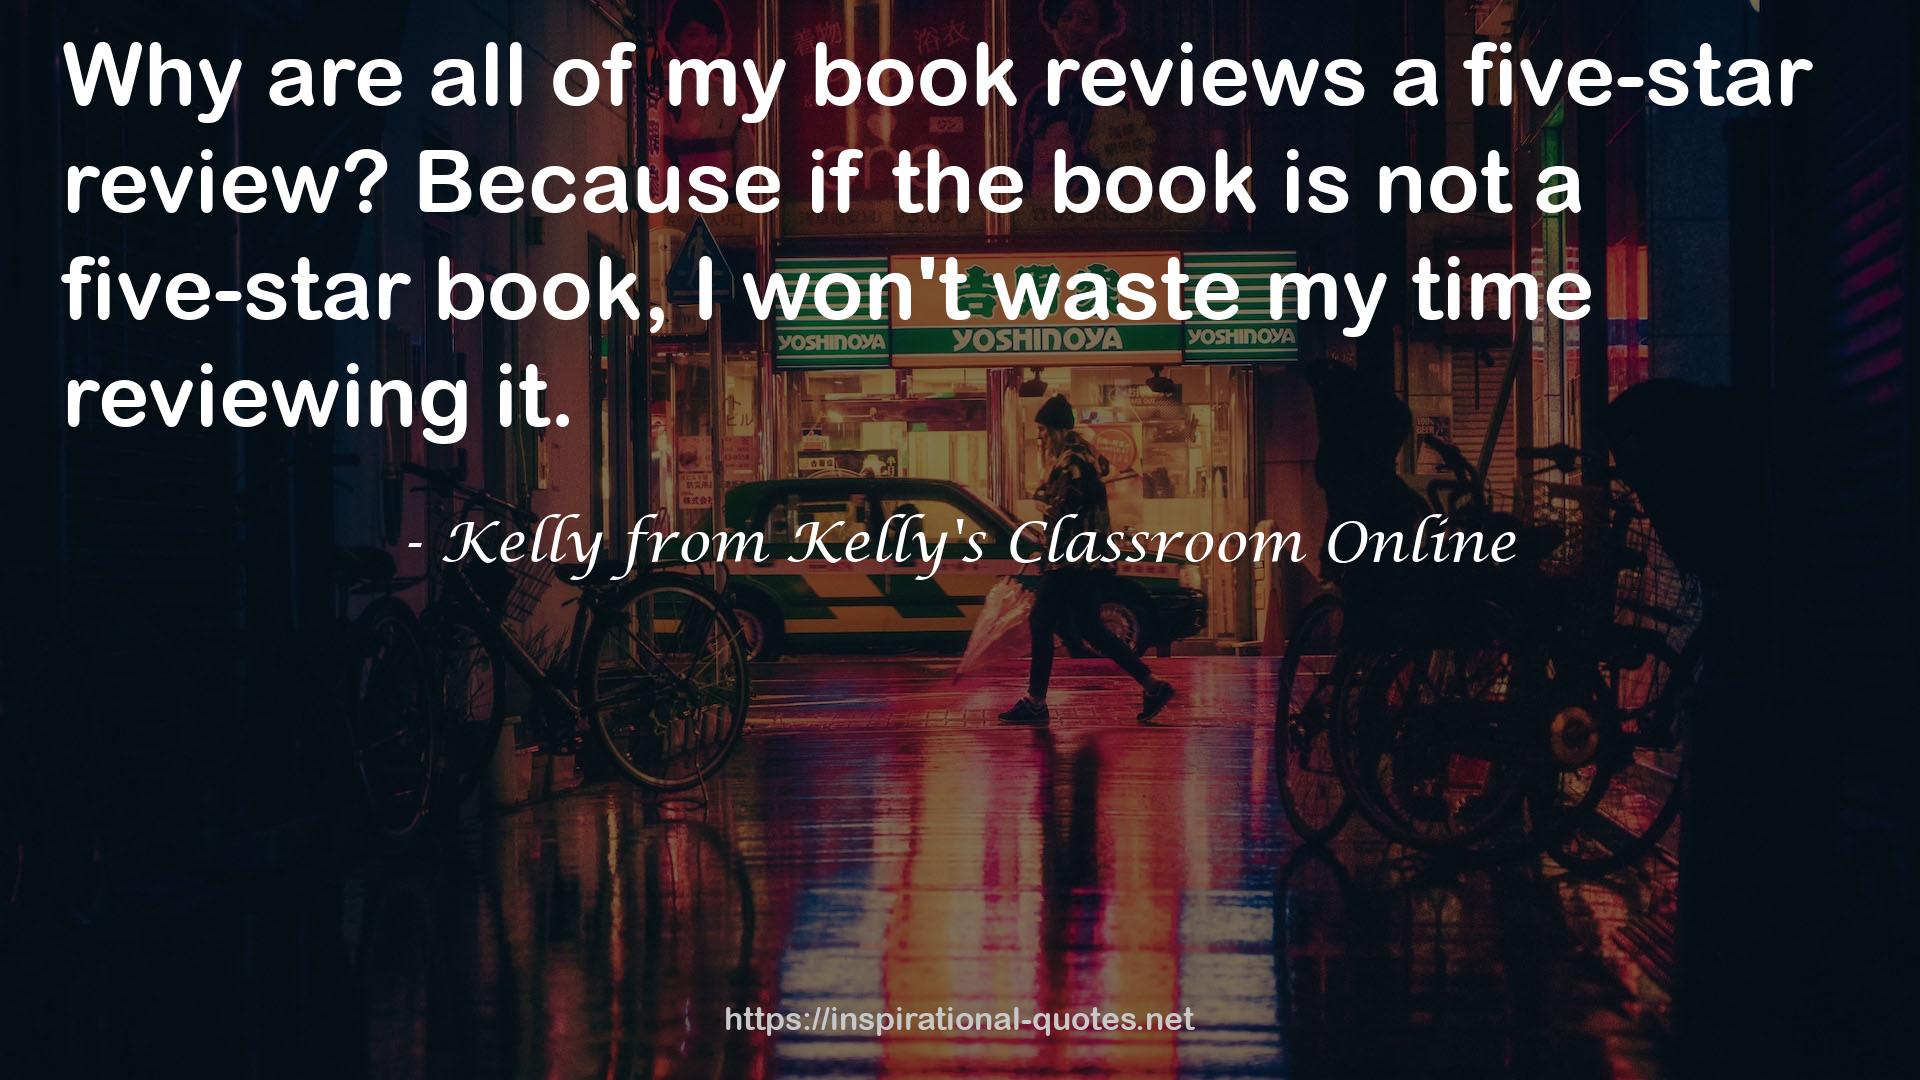 Kelly from Kelly's Classroom Online QUOTES